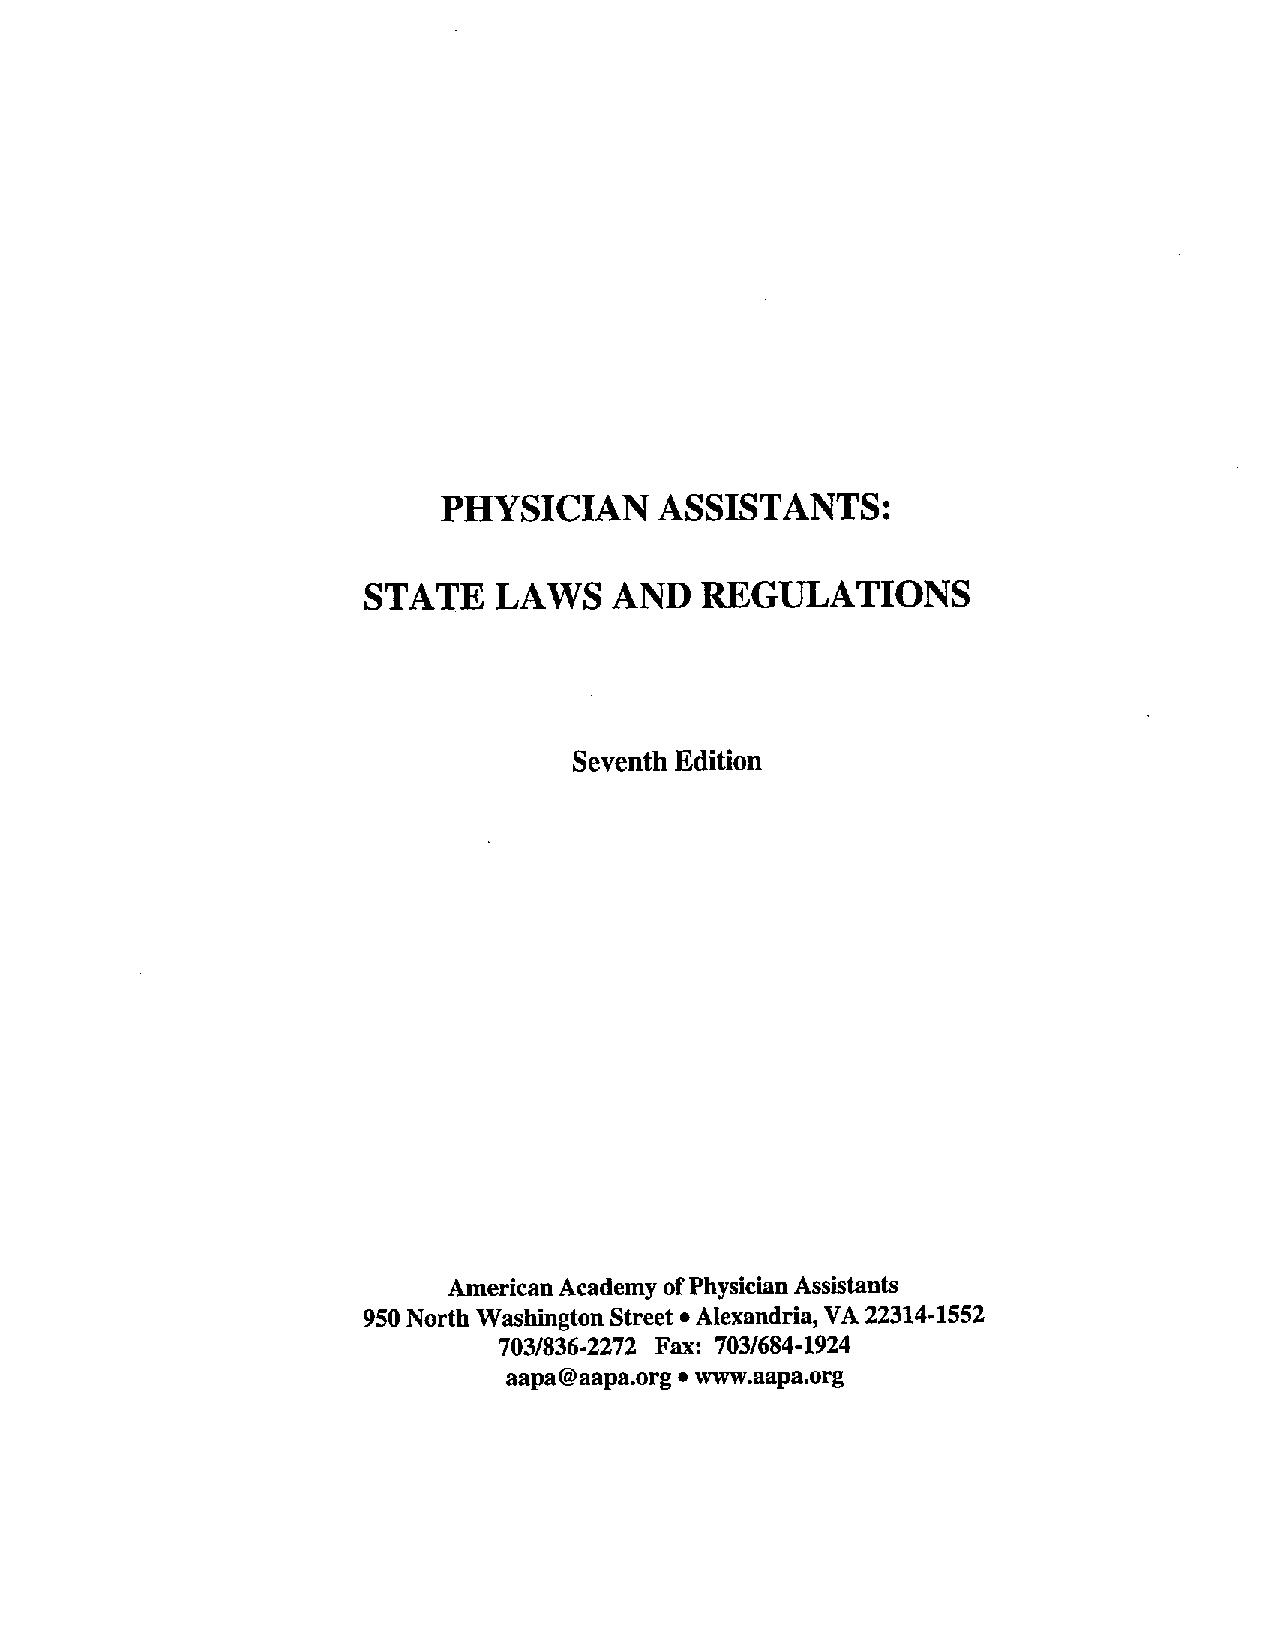 PA State Laws and Regulations 7th Edition